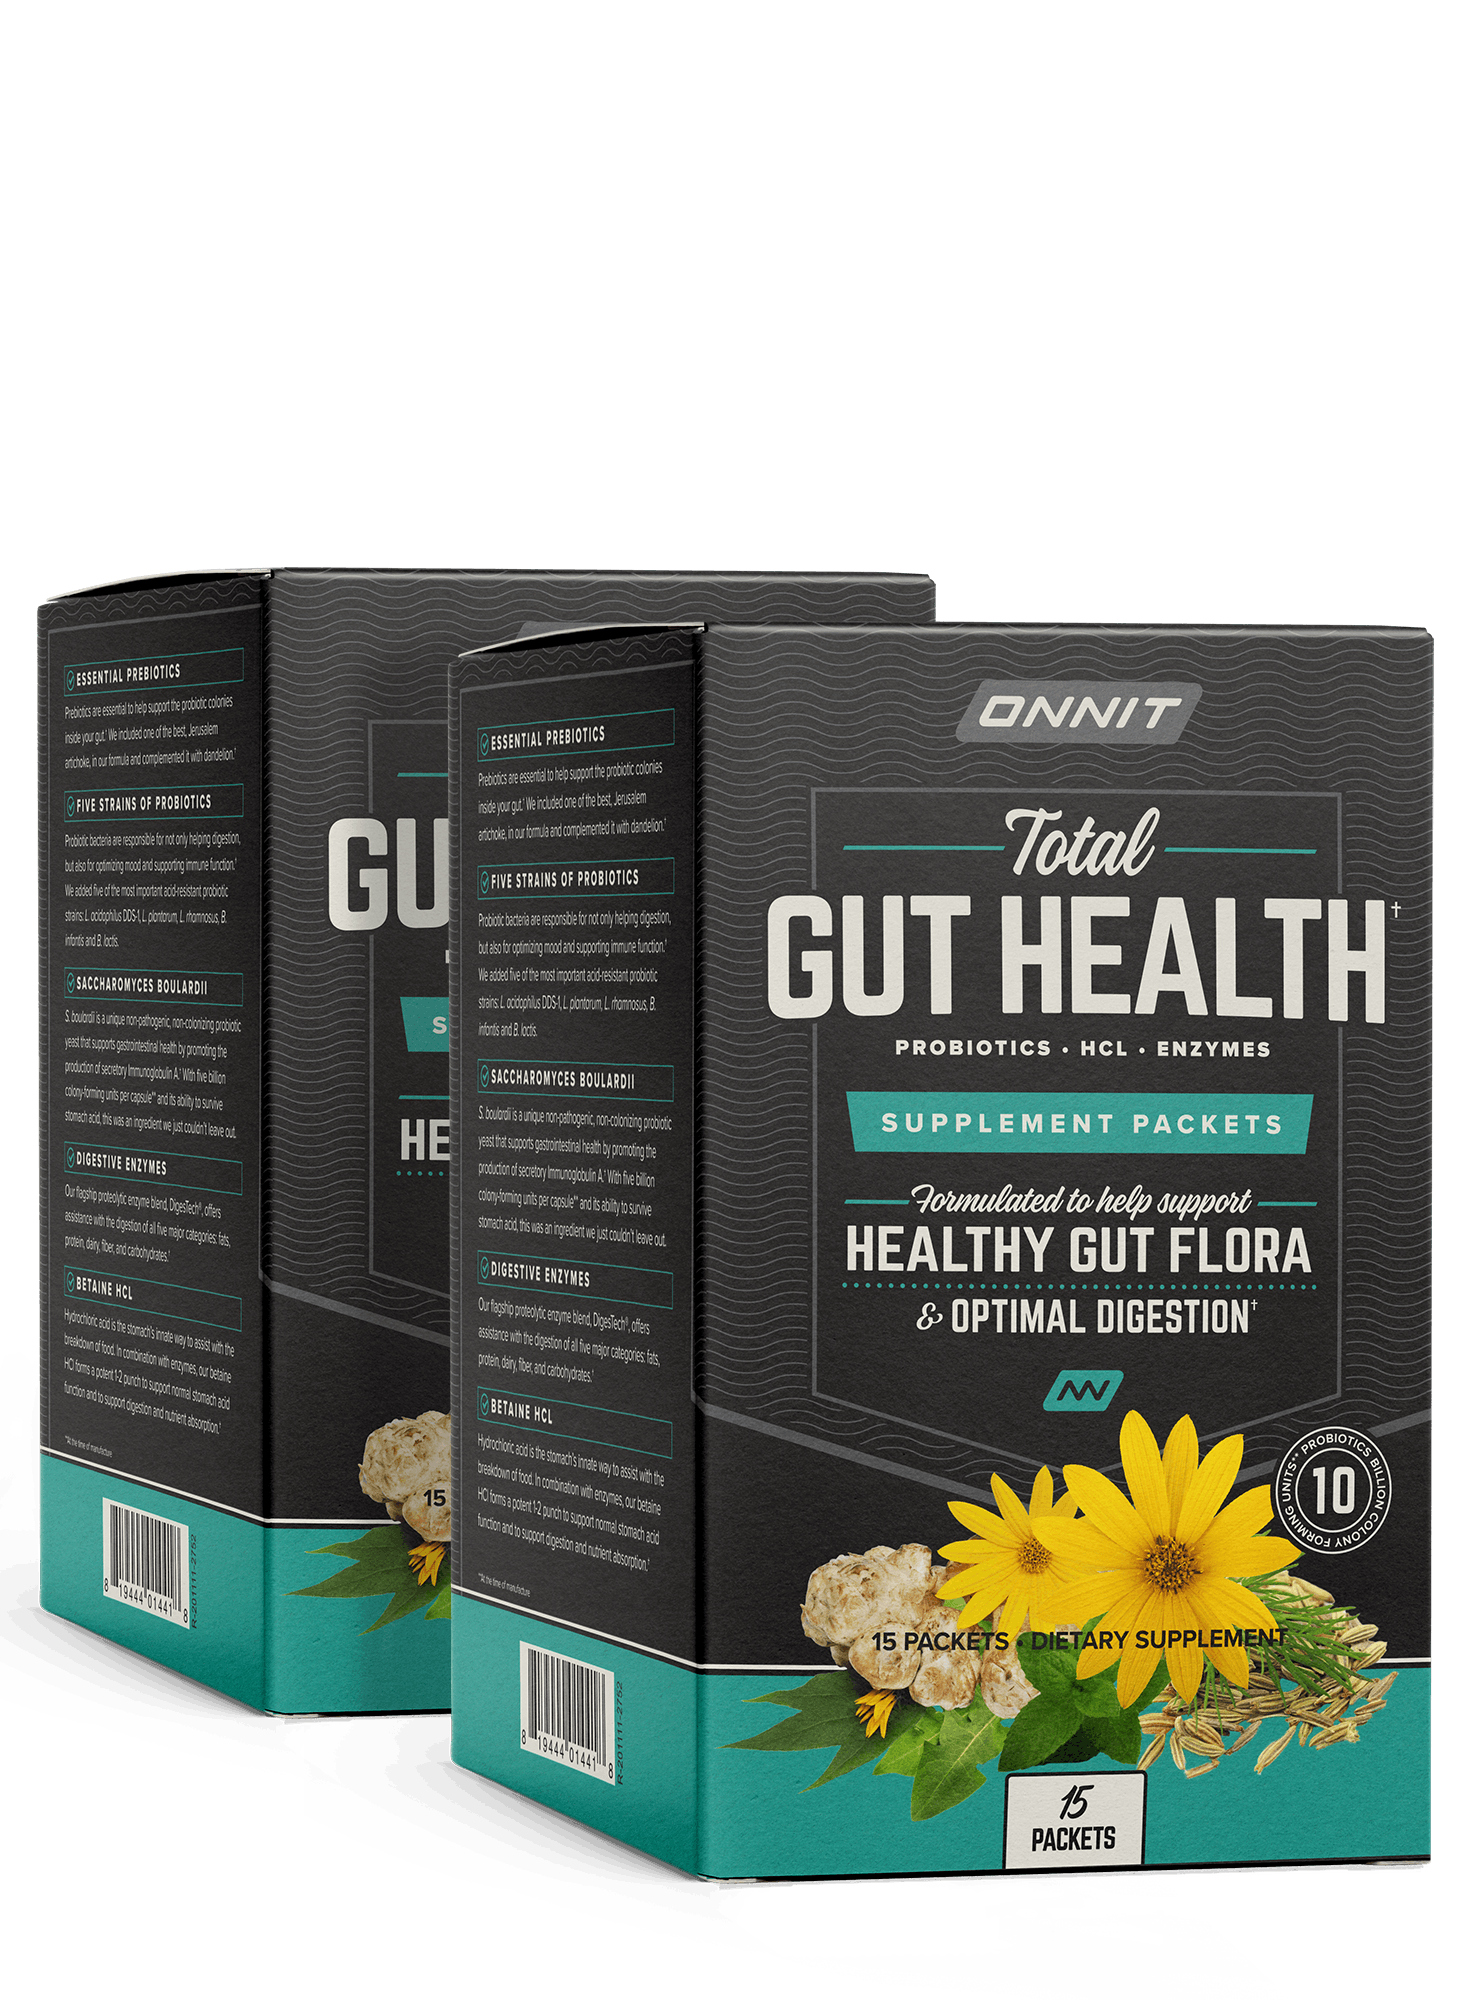 Onnit　Health　GUT　Gut　HEALTH™:　Total　Probiotics　Supplement　with